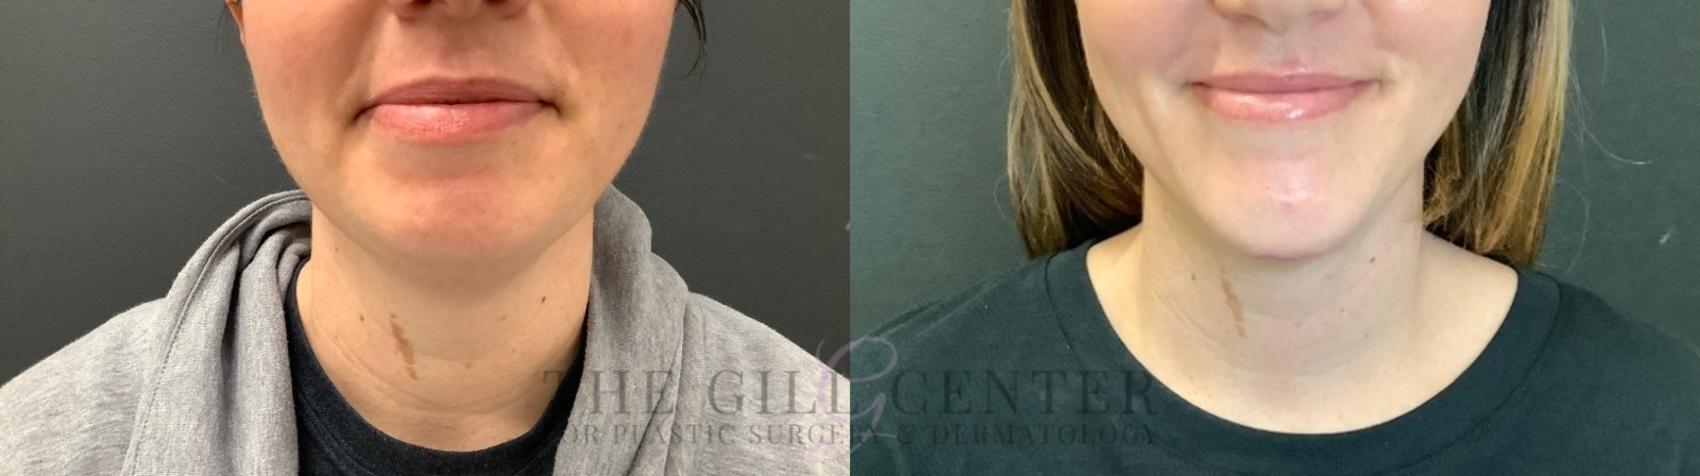 Chin Augmentation Case 512 Before & After Front | The Woodlands, TX | The Gill Center for Plastic Surgery and Dermatology